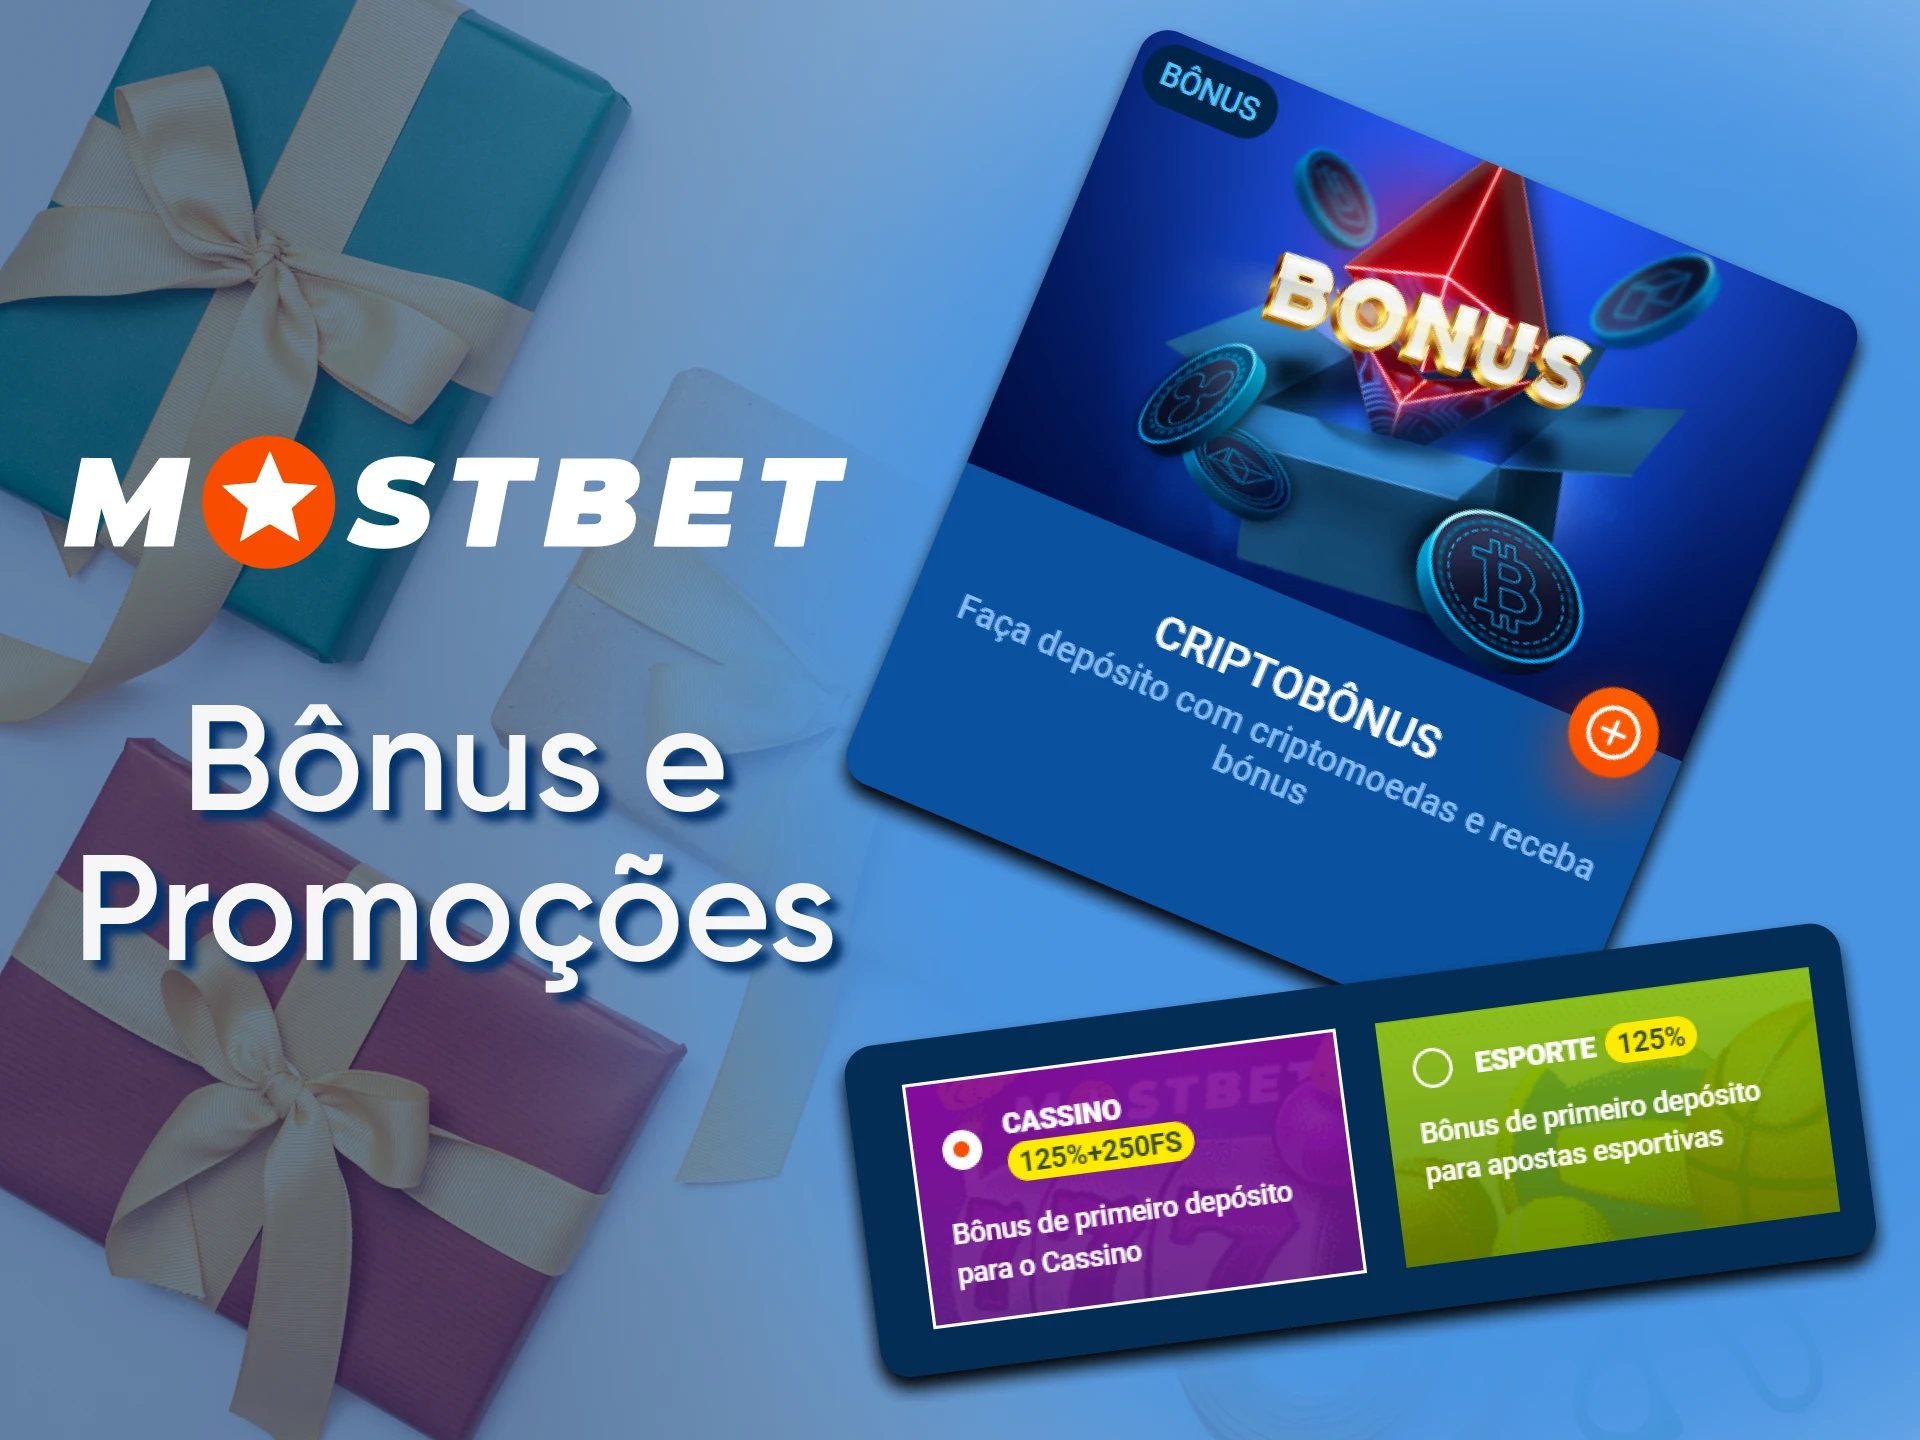 Receive a Mostbet welcome bonus for casino and sports games.